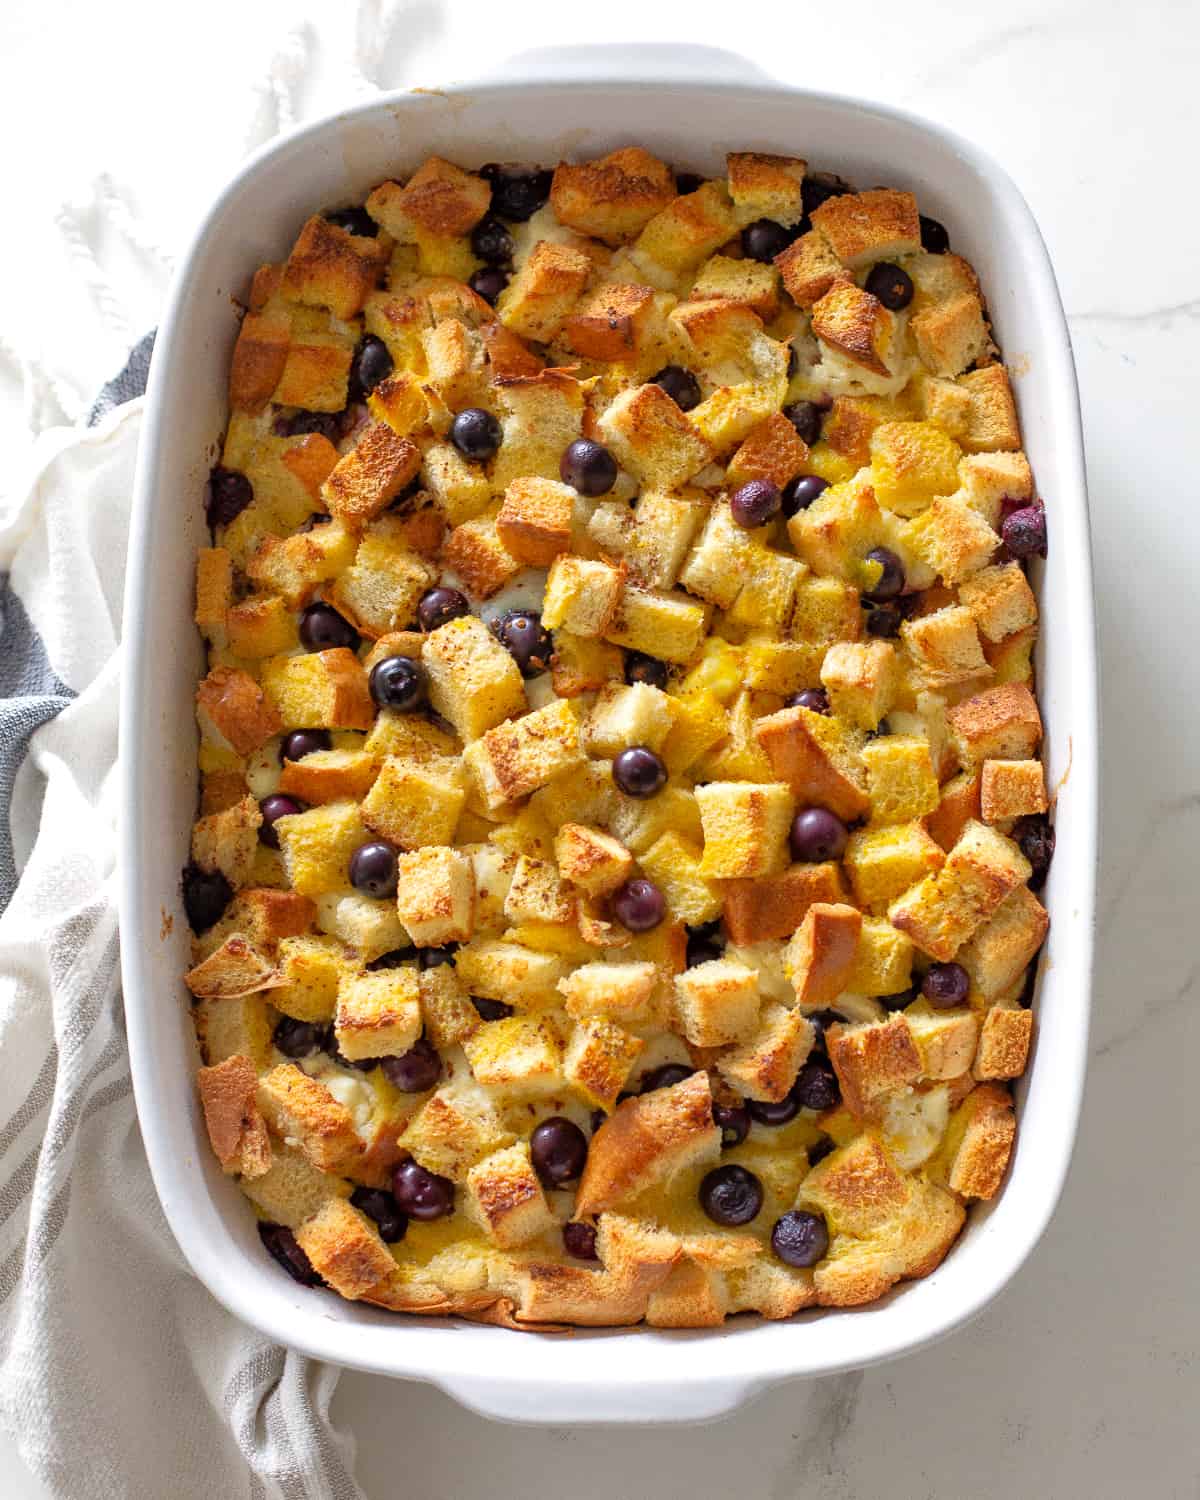 Blueberry French Toast Casserole